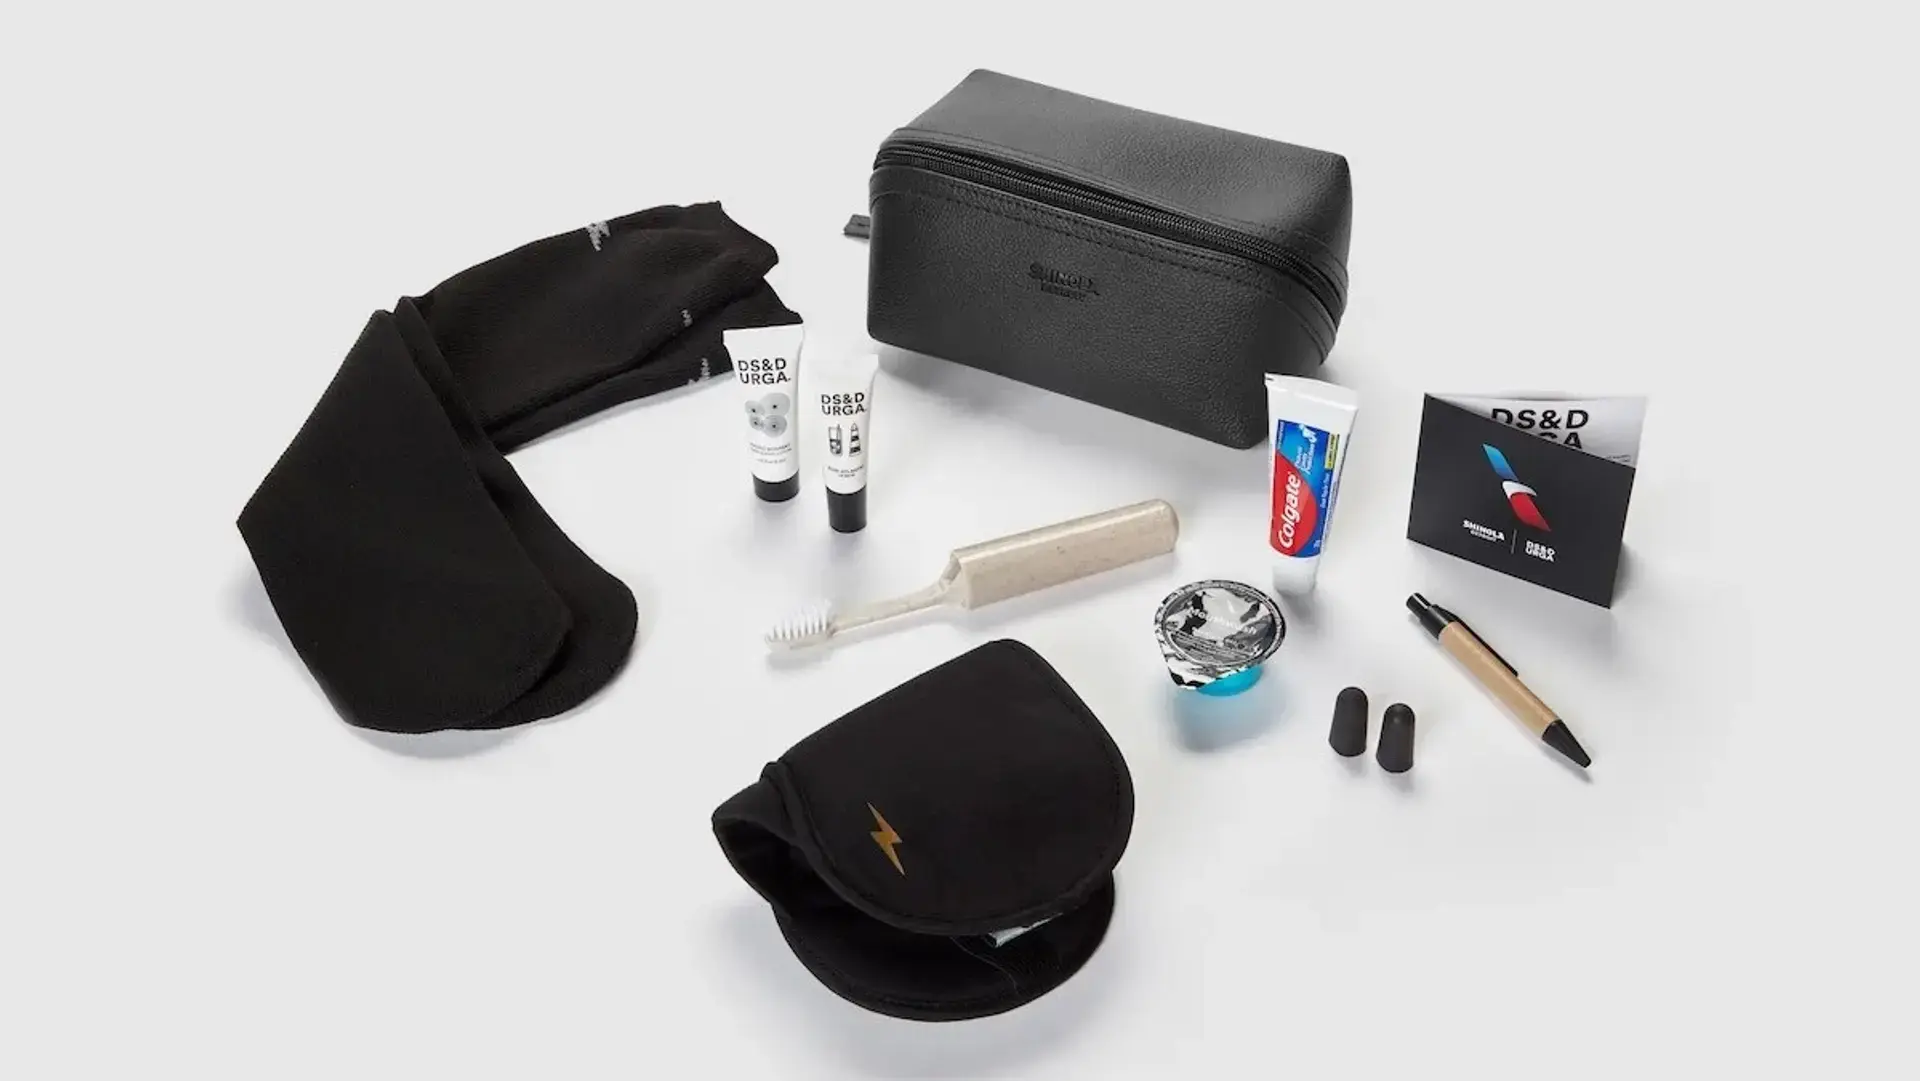 Business in a Box Detailing Kit